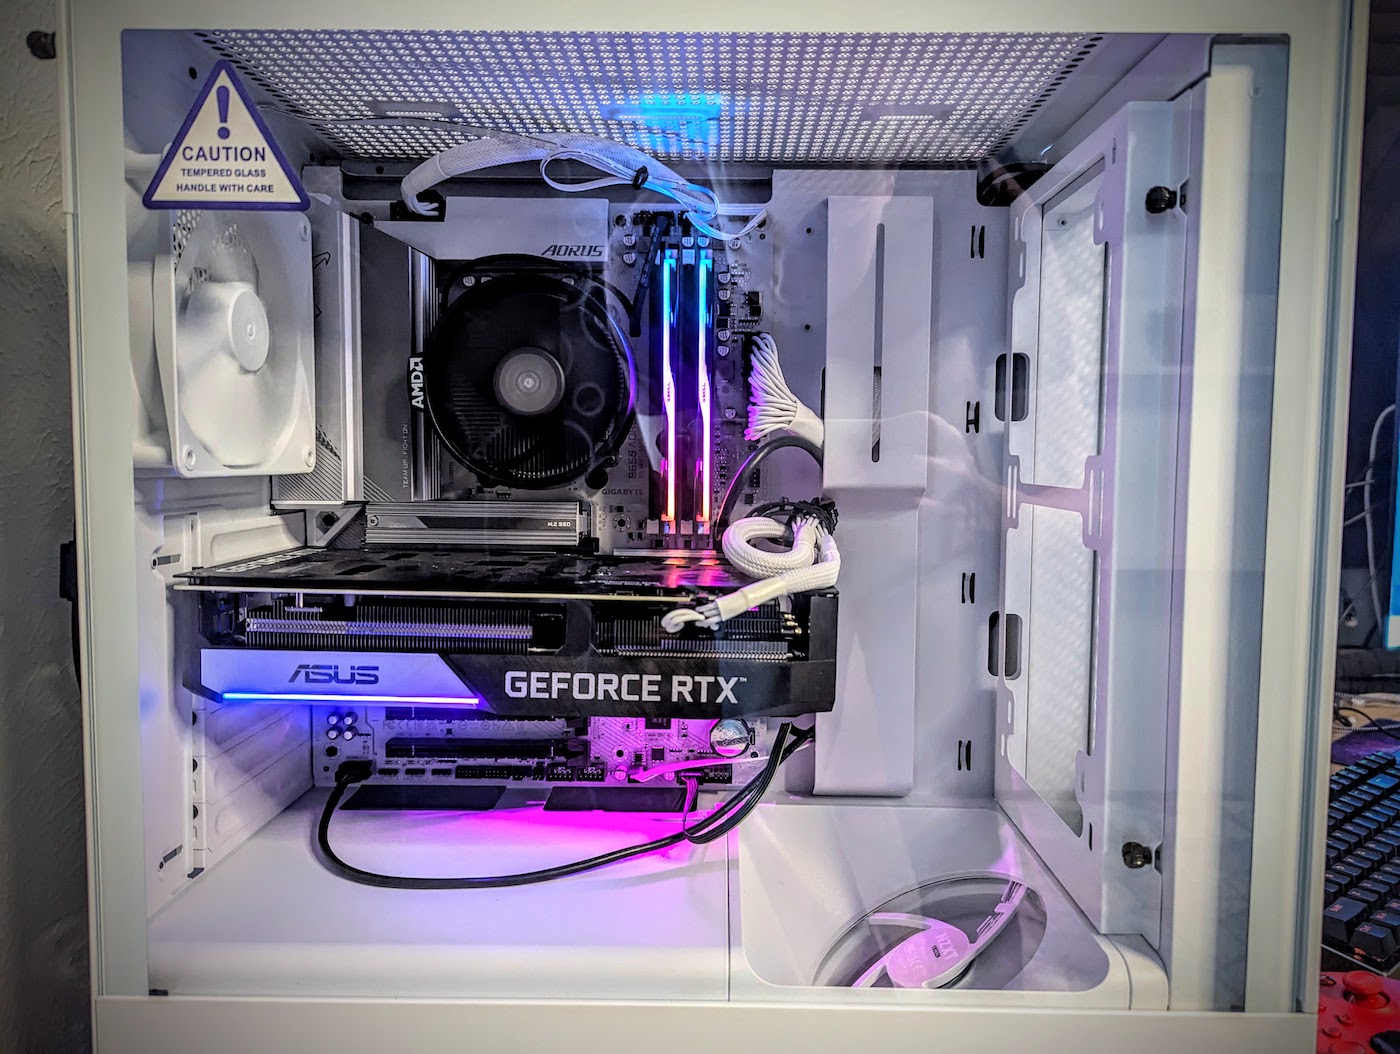 The mostly white PC we built featuring the Ryzen 5 8600G with integrated NPU